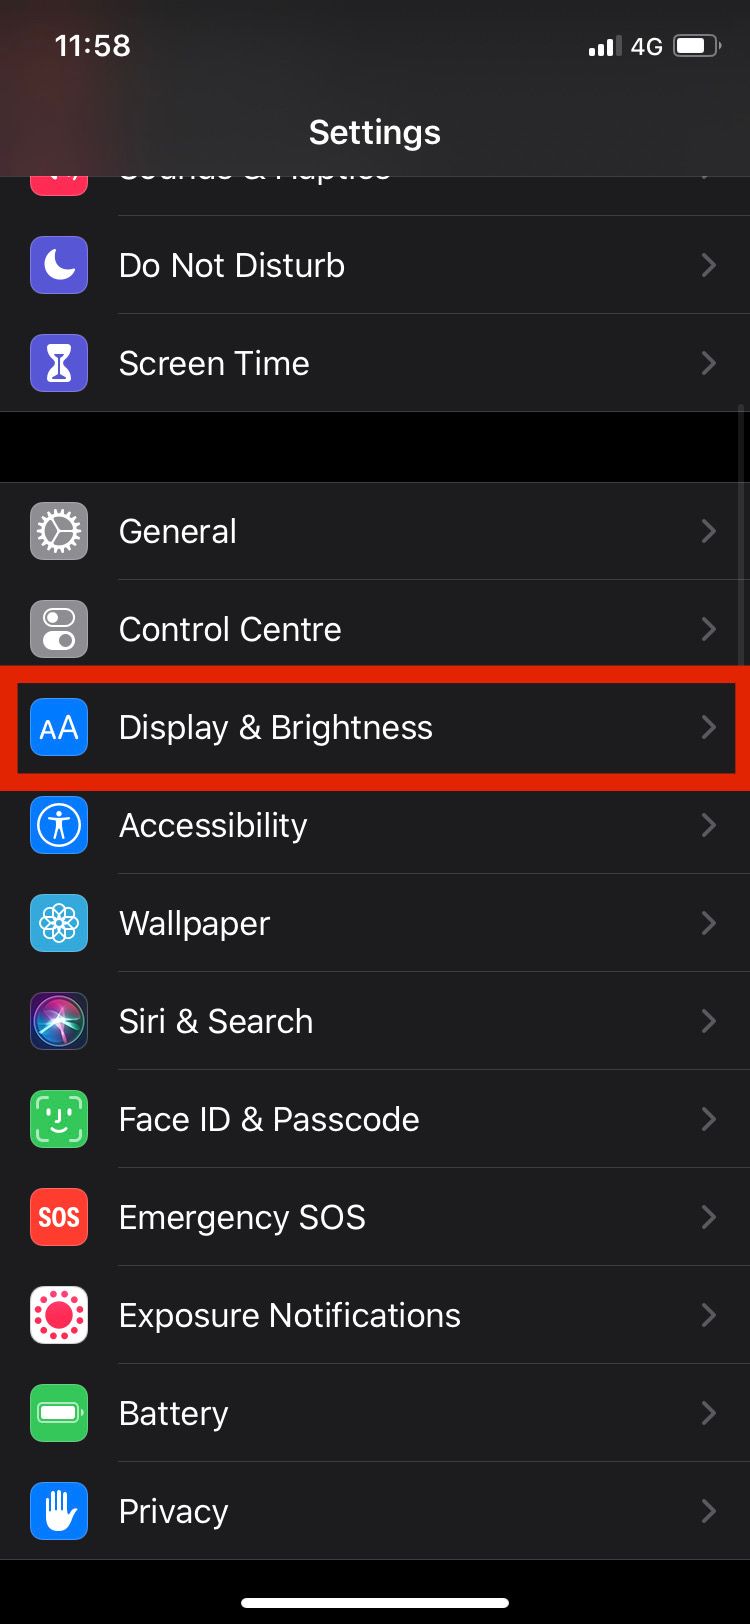 Open display and brightness